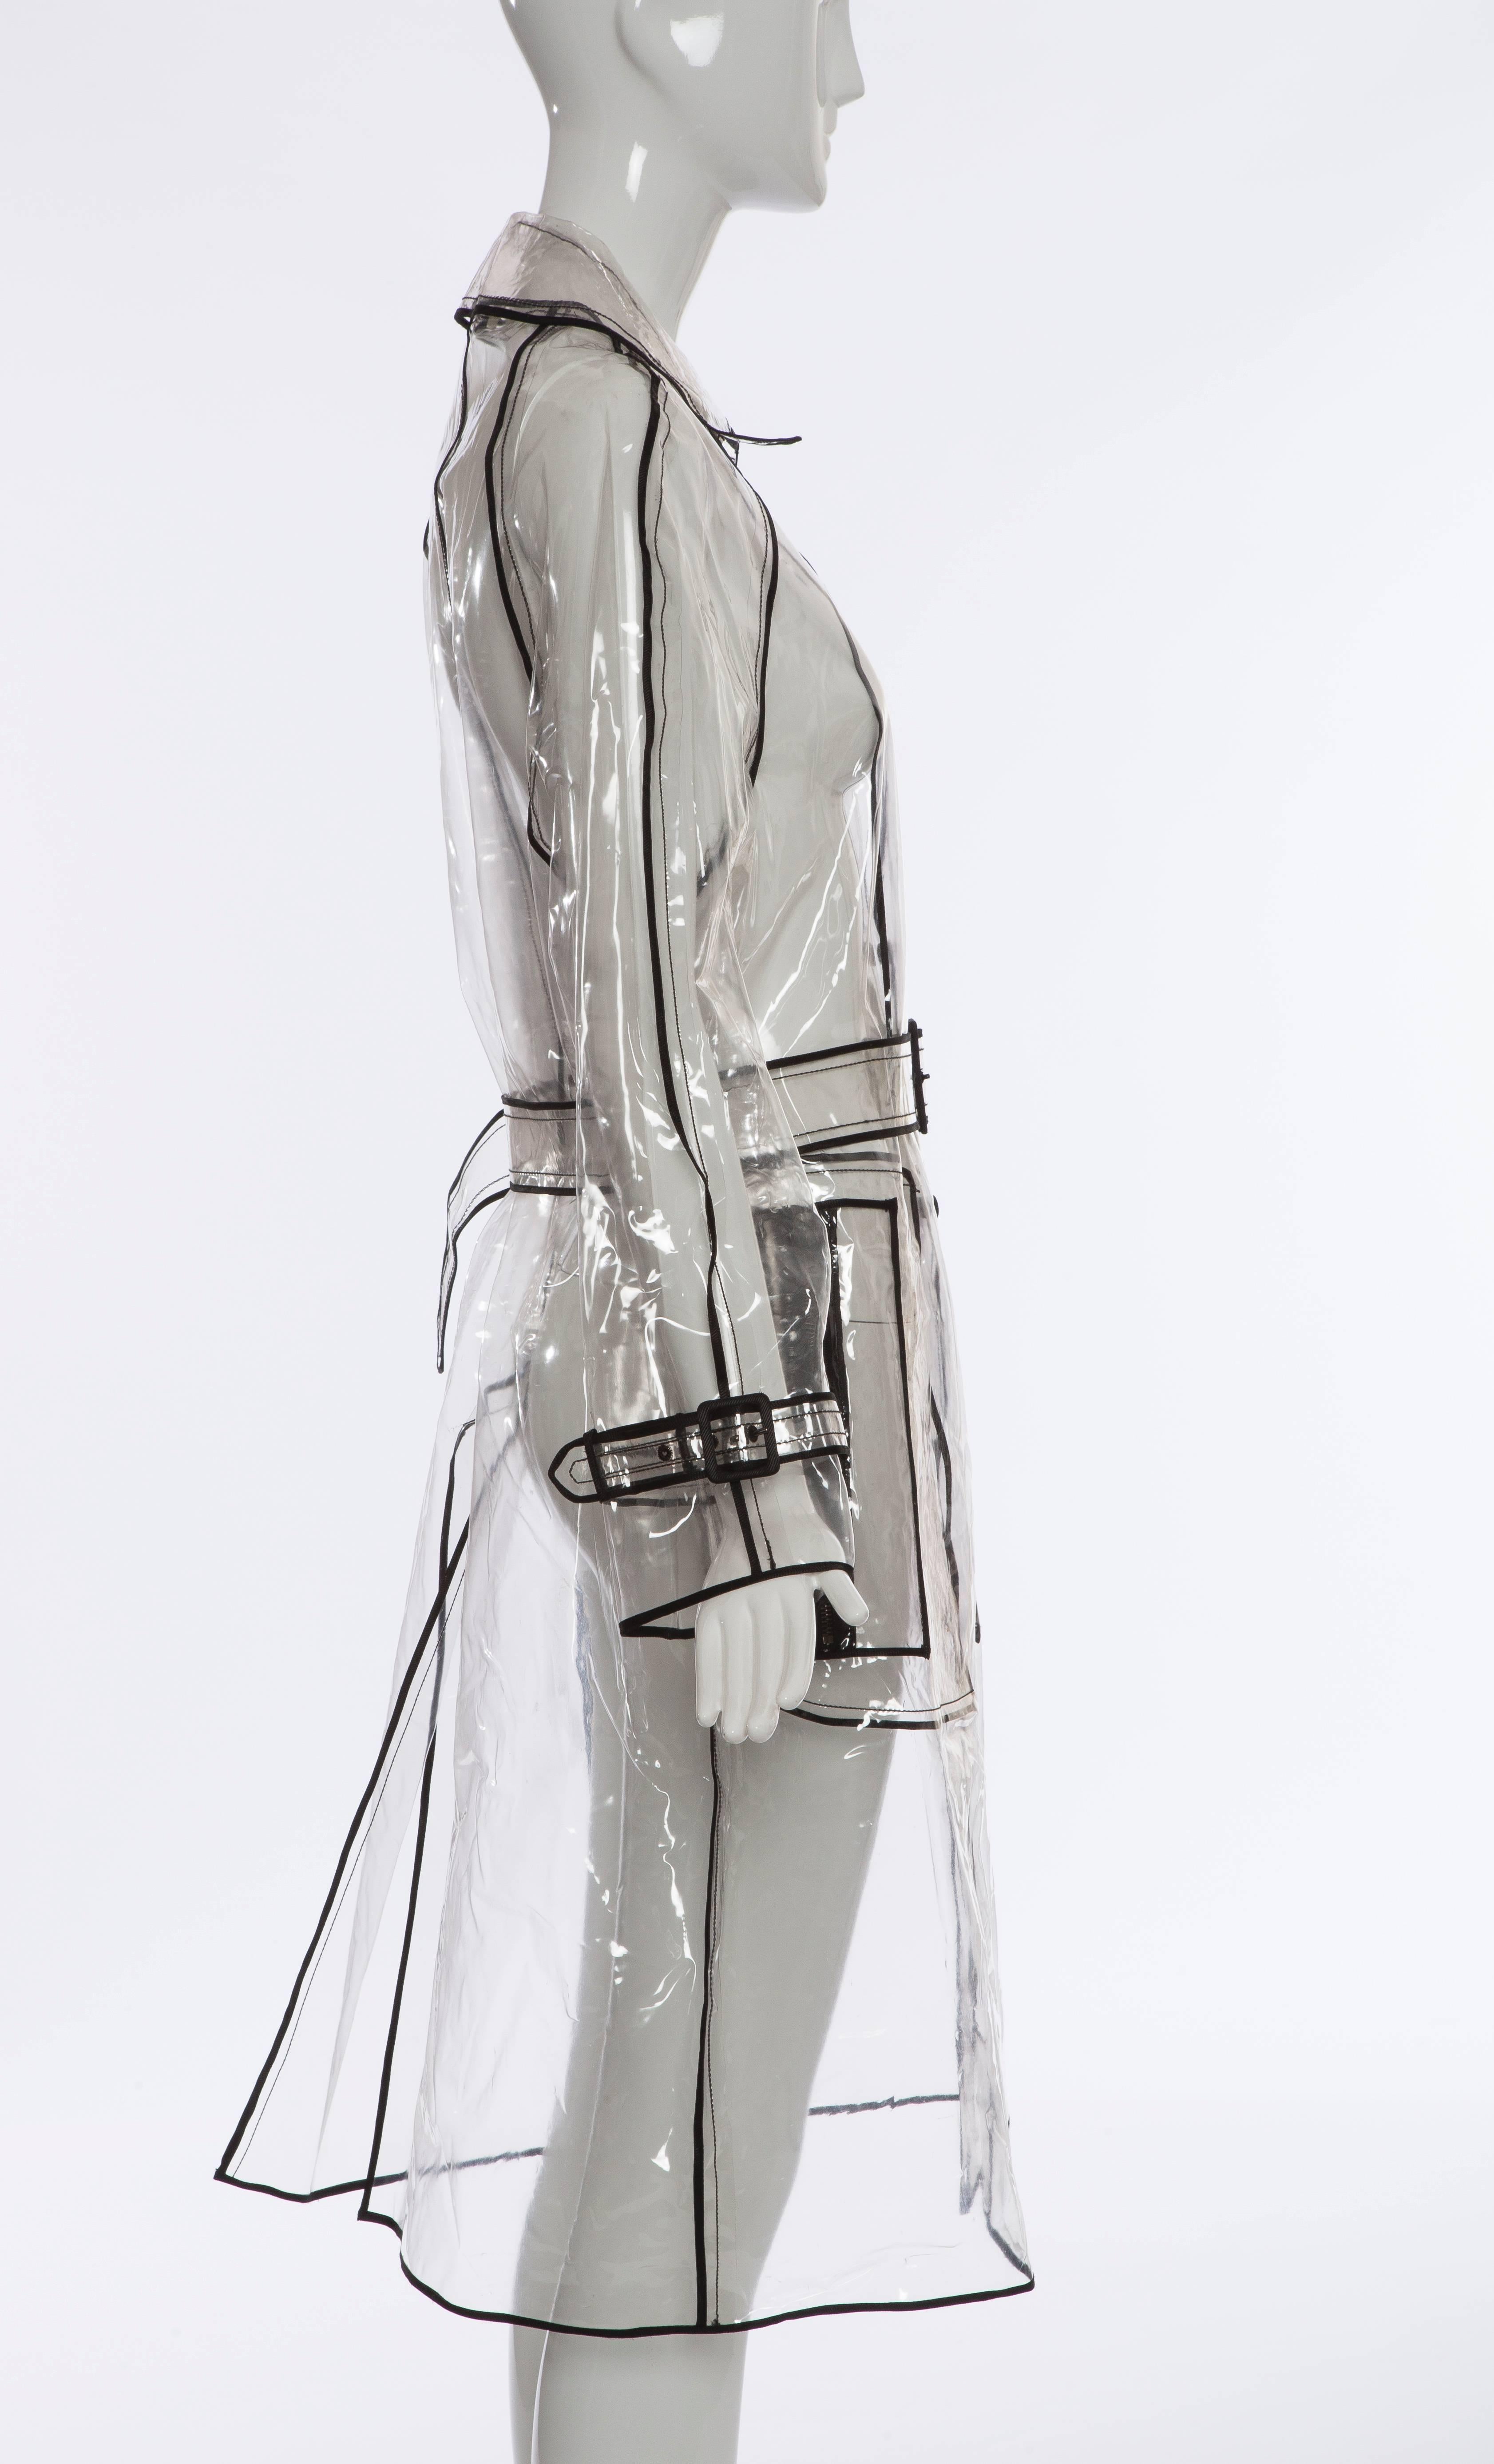 Prada, Autumn - Winter 2002-3, transparent PVC rain coat with pointed collar, long sleeves, dual zip pockets at sides, belted waist, contrasting black trim throughout and snap closures at front. 

Exhibited at the Met's Spring 2012 Costume